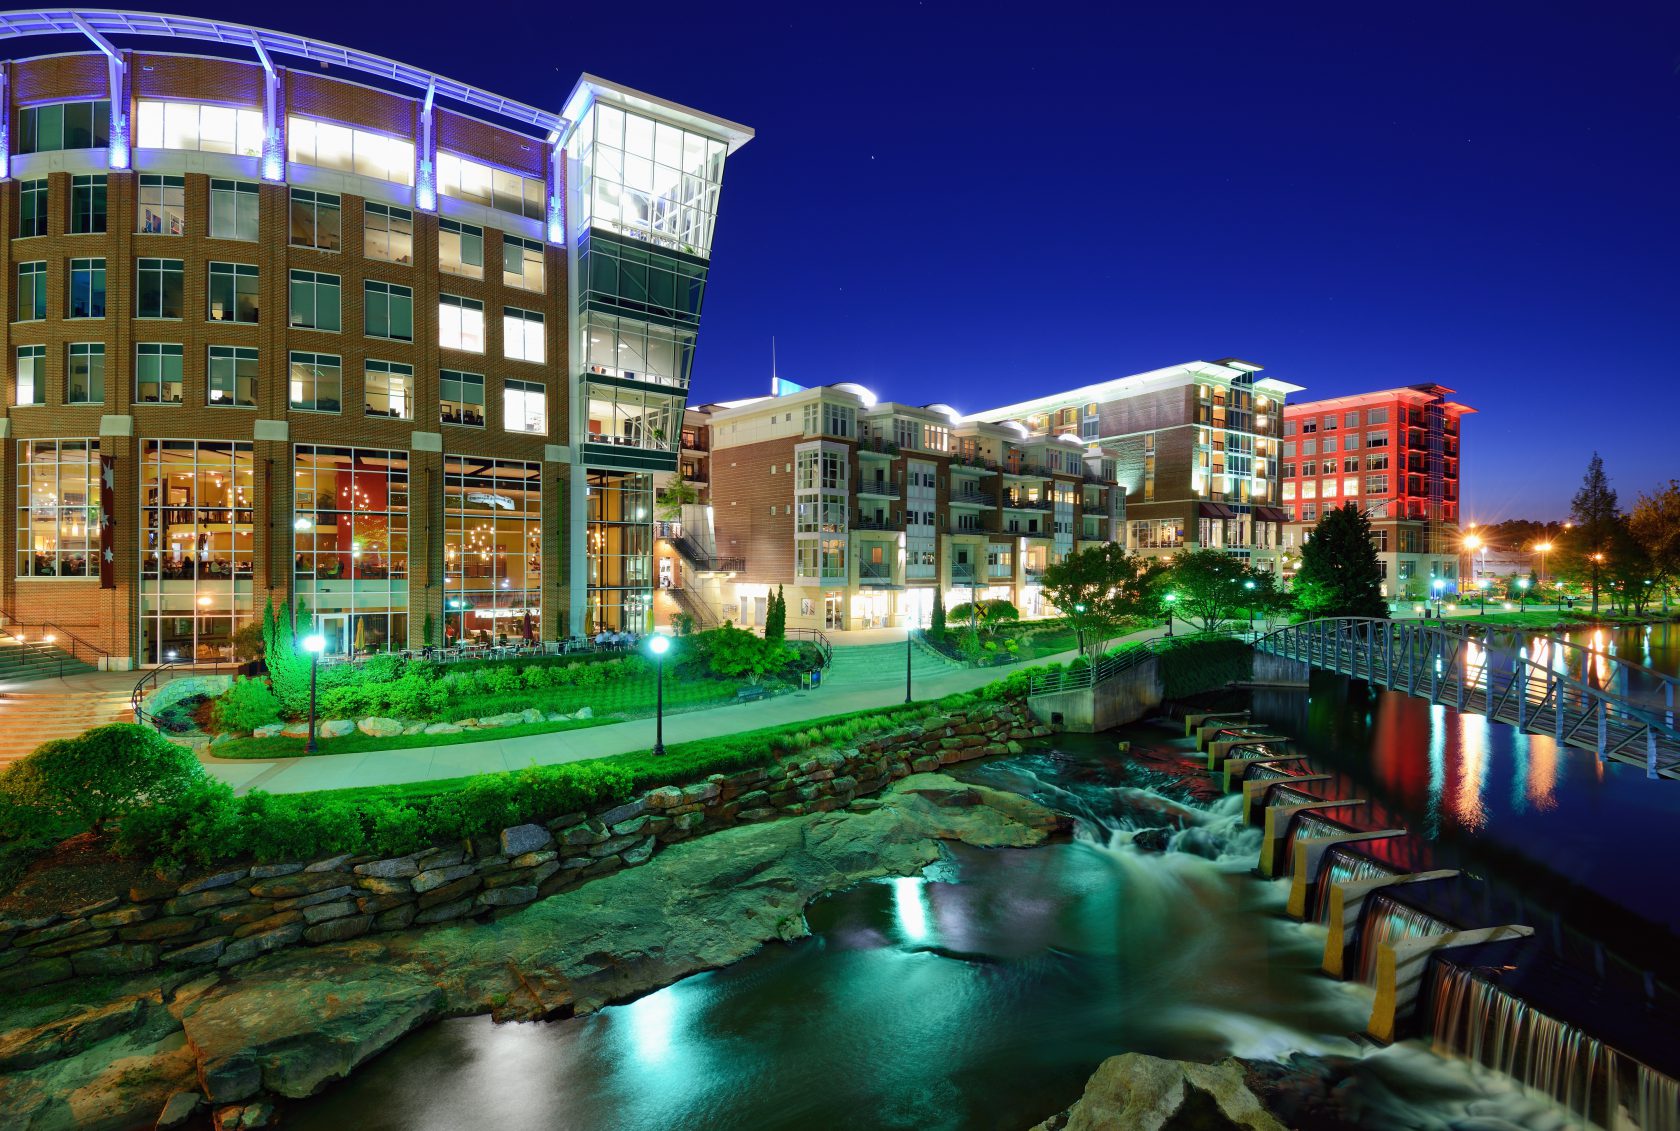 Downtown Greenville at Nigth with Reedy River